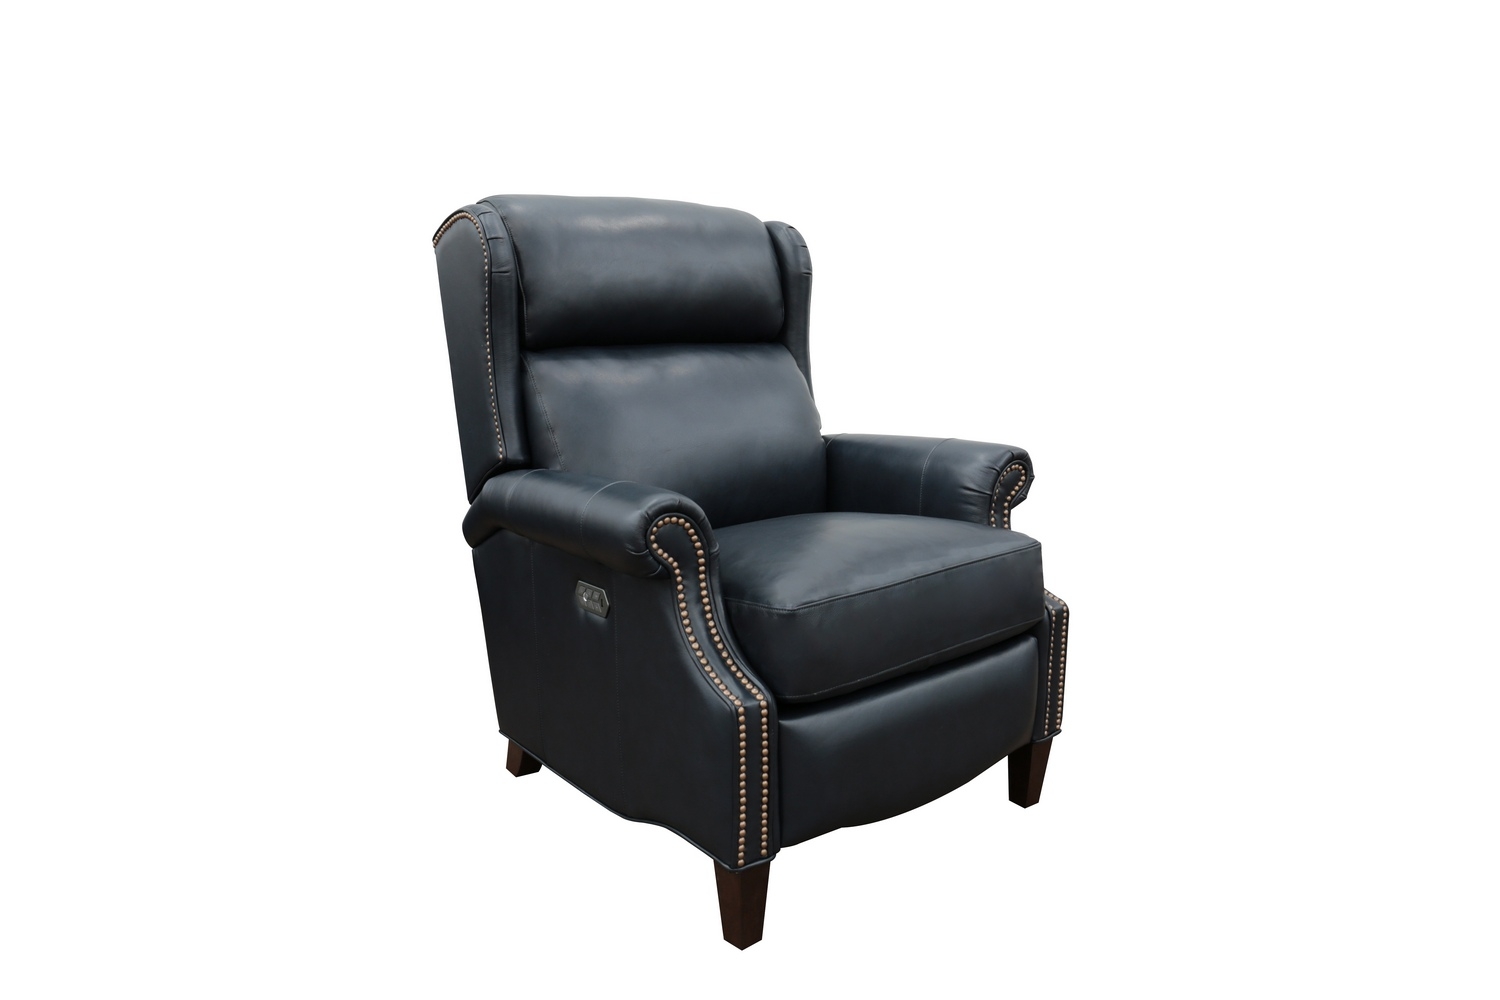 Barcalounger Philadelphia Power Recliner Chair with Power Head Rest and Lumbar - Shoreham Blue/All Leather